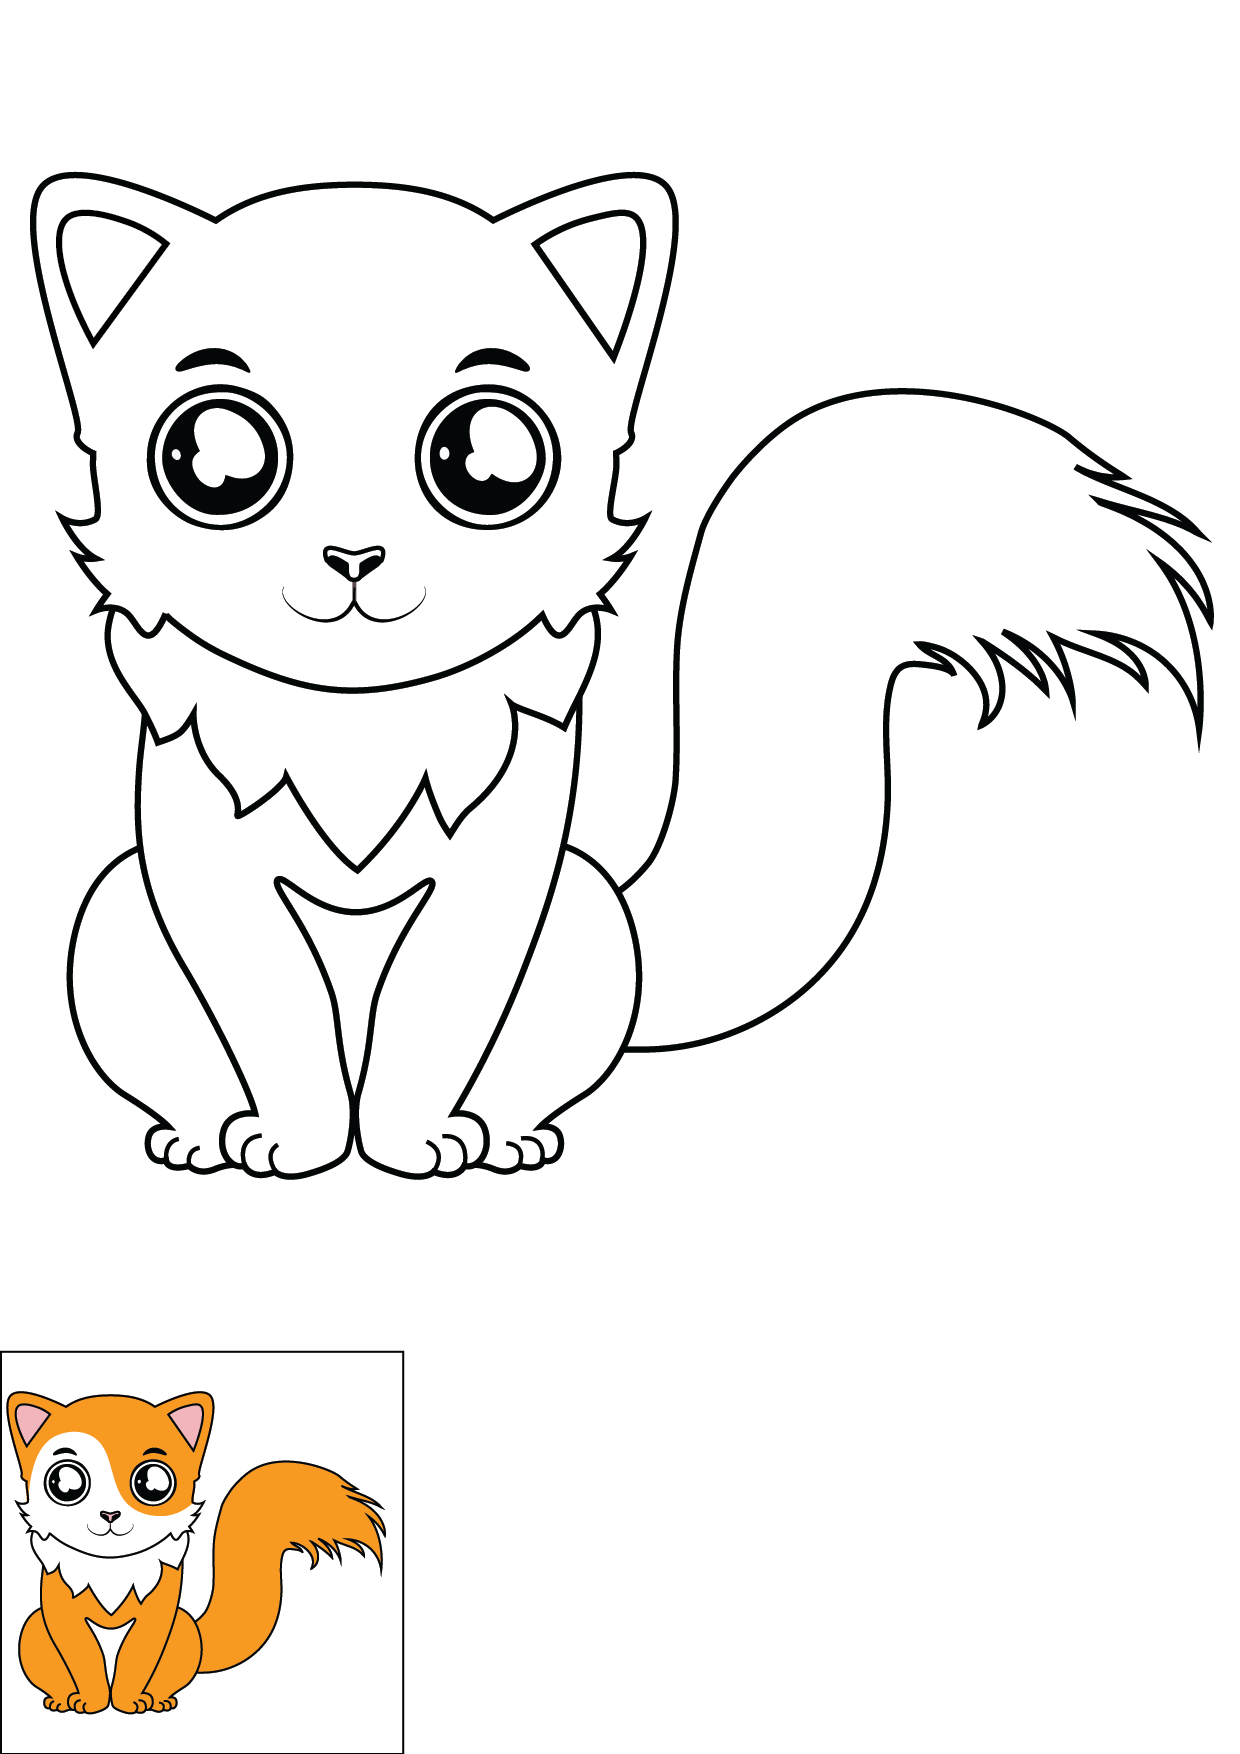 How to Draw A Cat Step by Step Printable Color